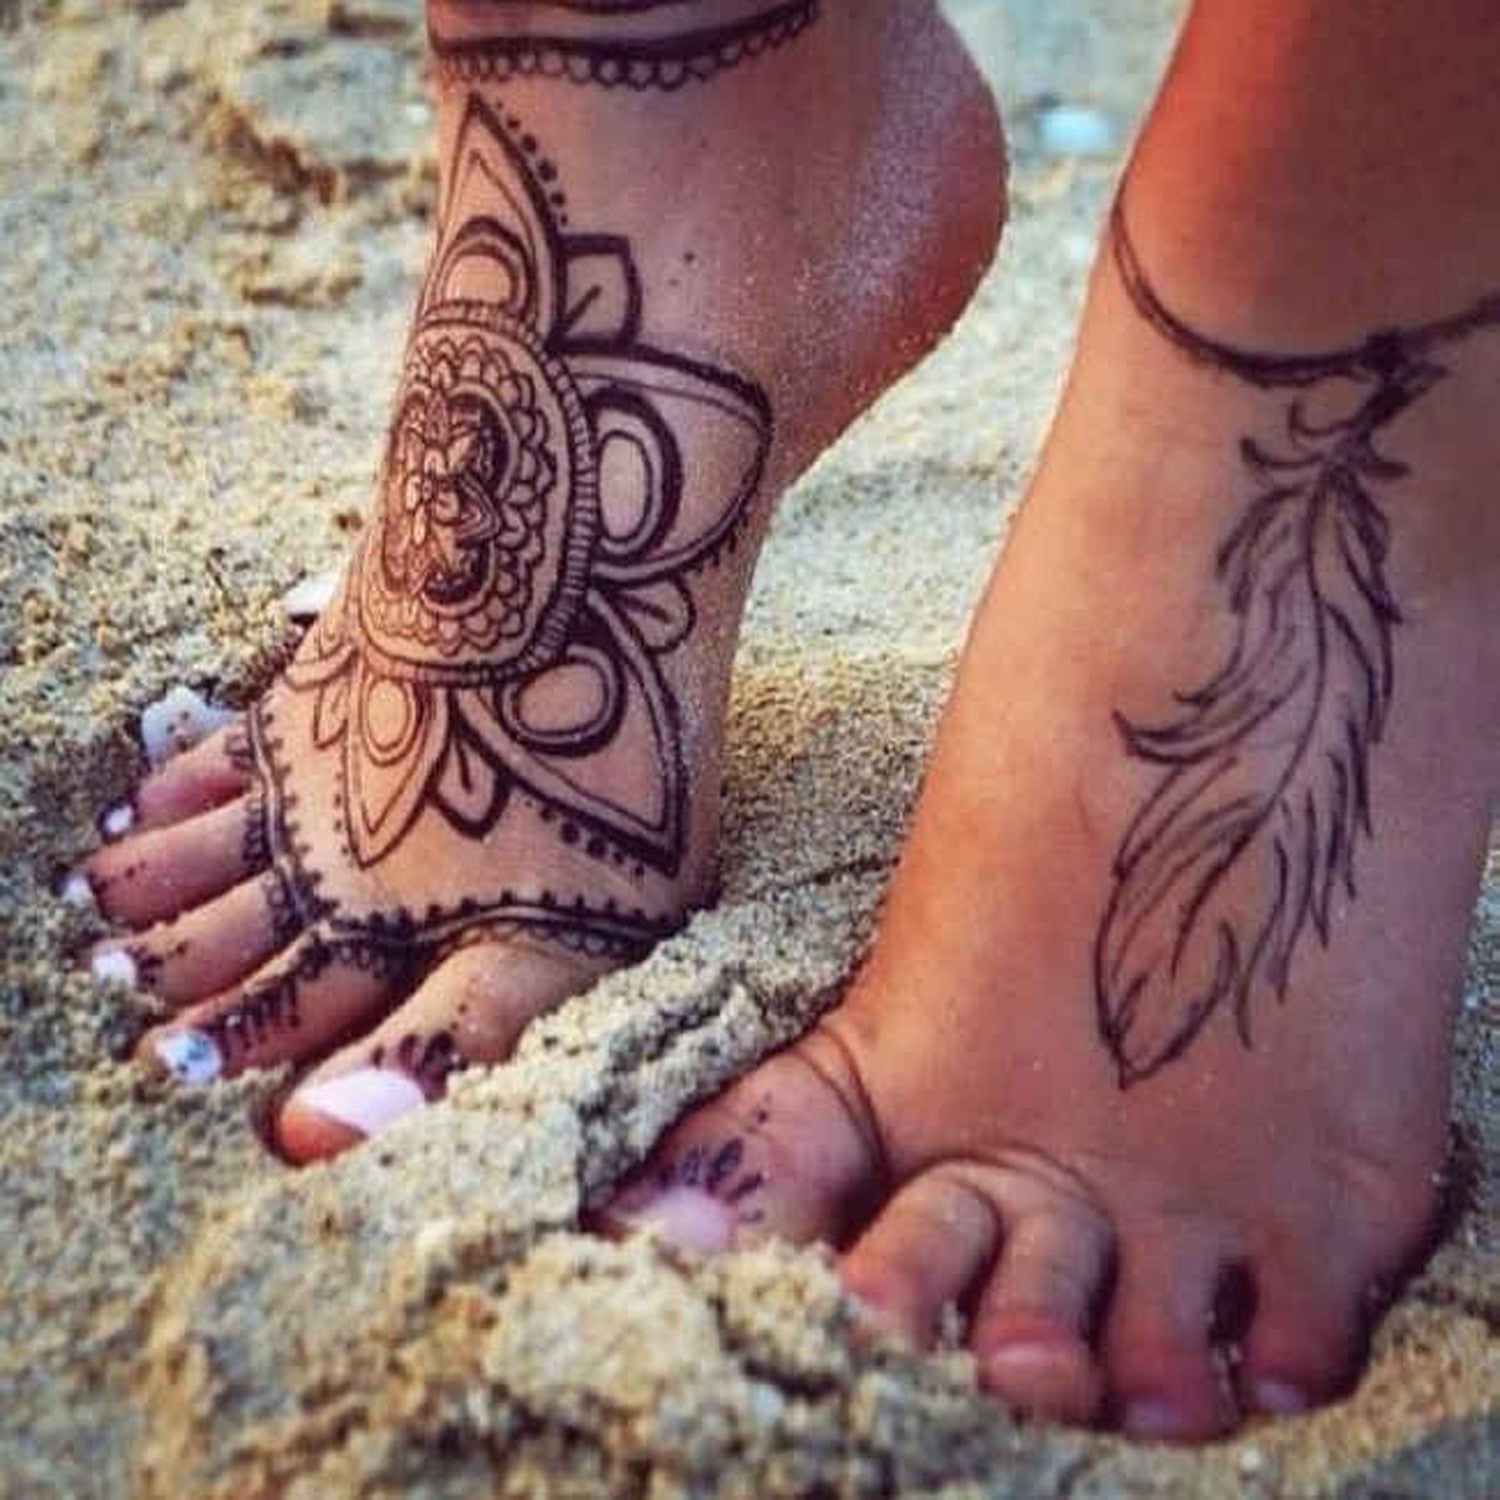 Tattoo Design Idea On Foot For Girls:Amazon.com:Appstore for Android